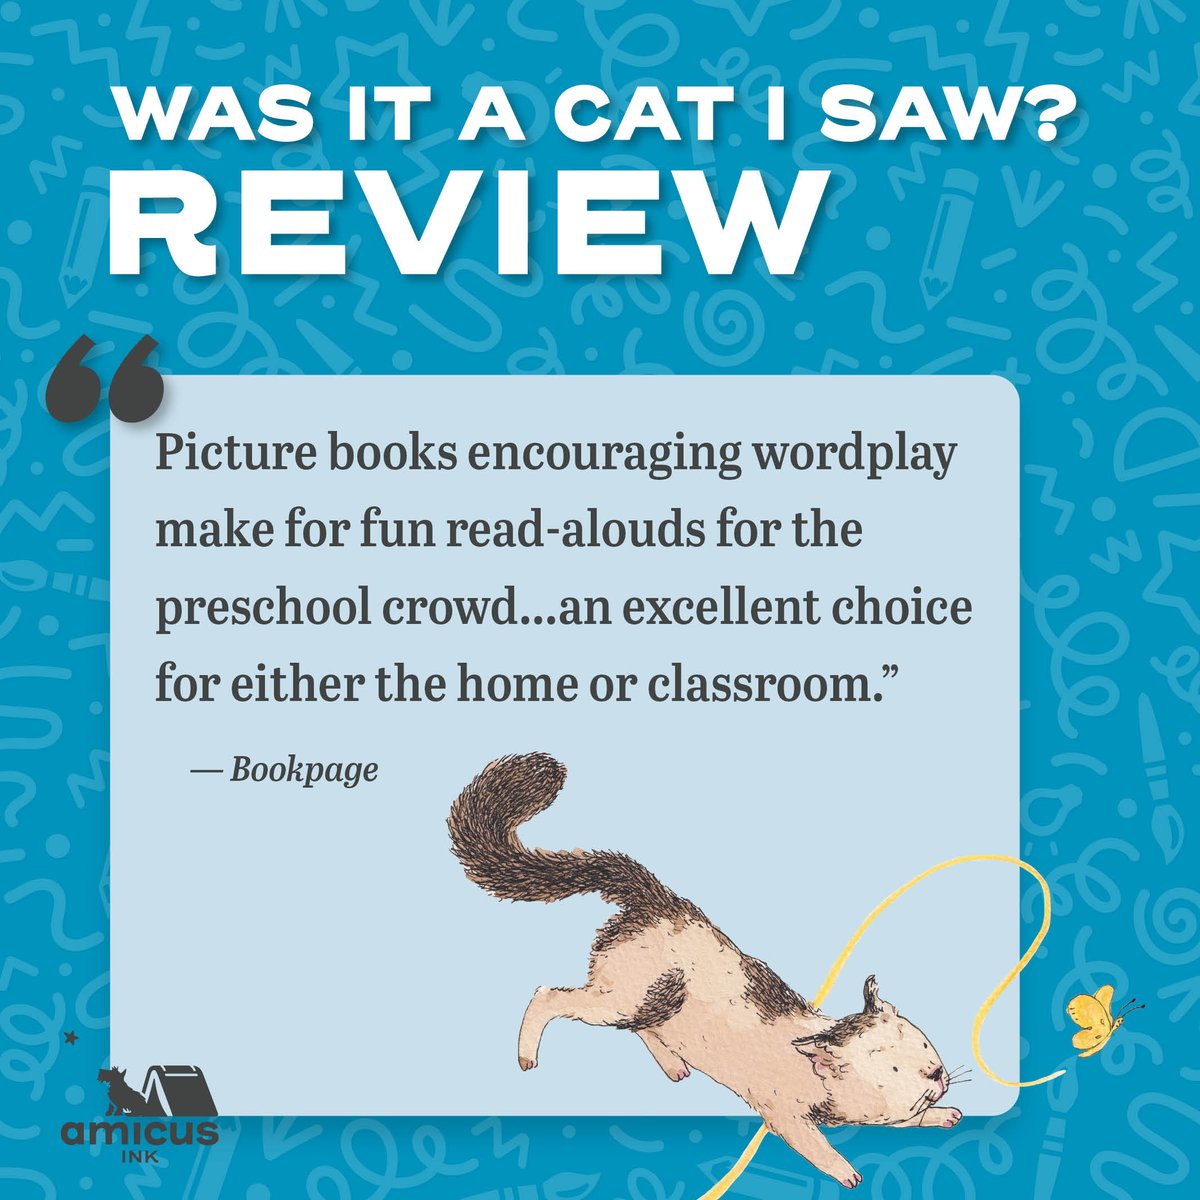 Go on a wordplay filled adventure with Was It a Cat I Saw? from Amicus Ink. @bookpage @laurabontje @emmasquillari #picturebooks #newbooks #wordplay #palindrome #readaloud #adventure #cats #bookreview #Amicus amicuspublishing.us/products/was-i…